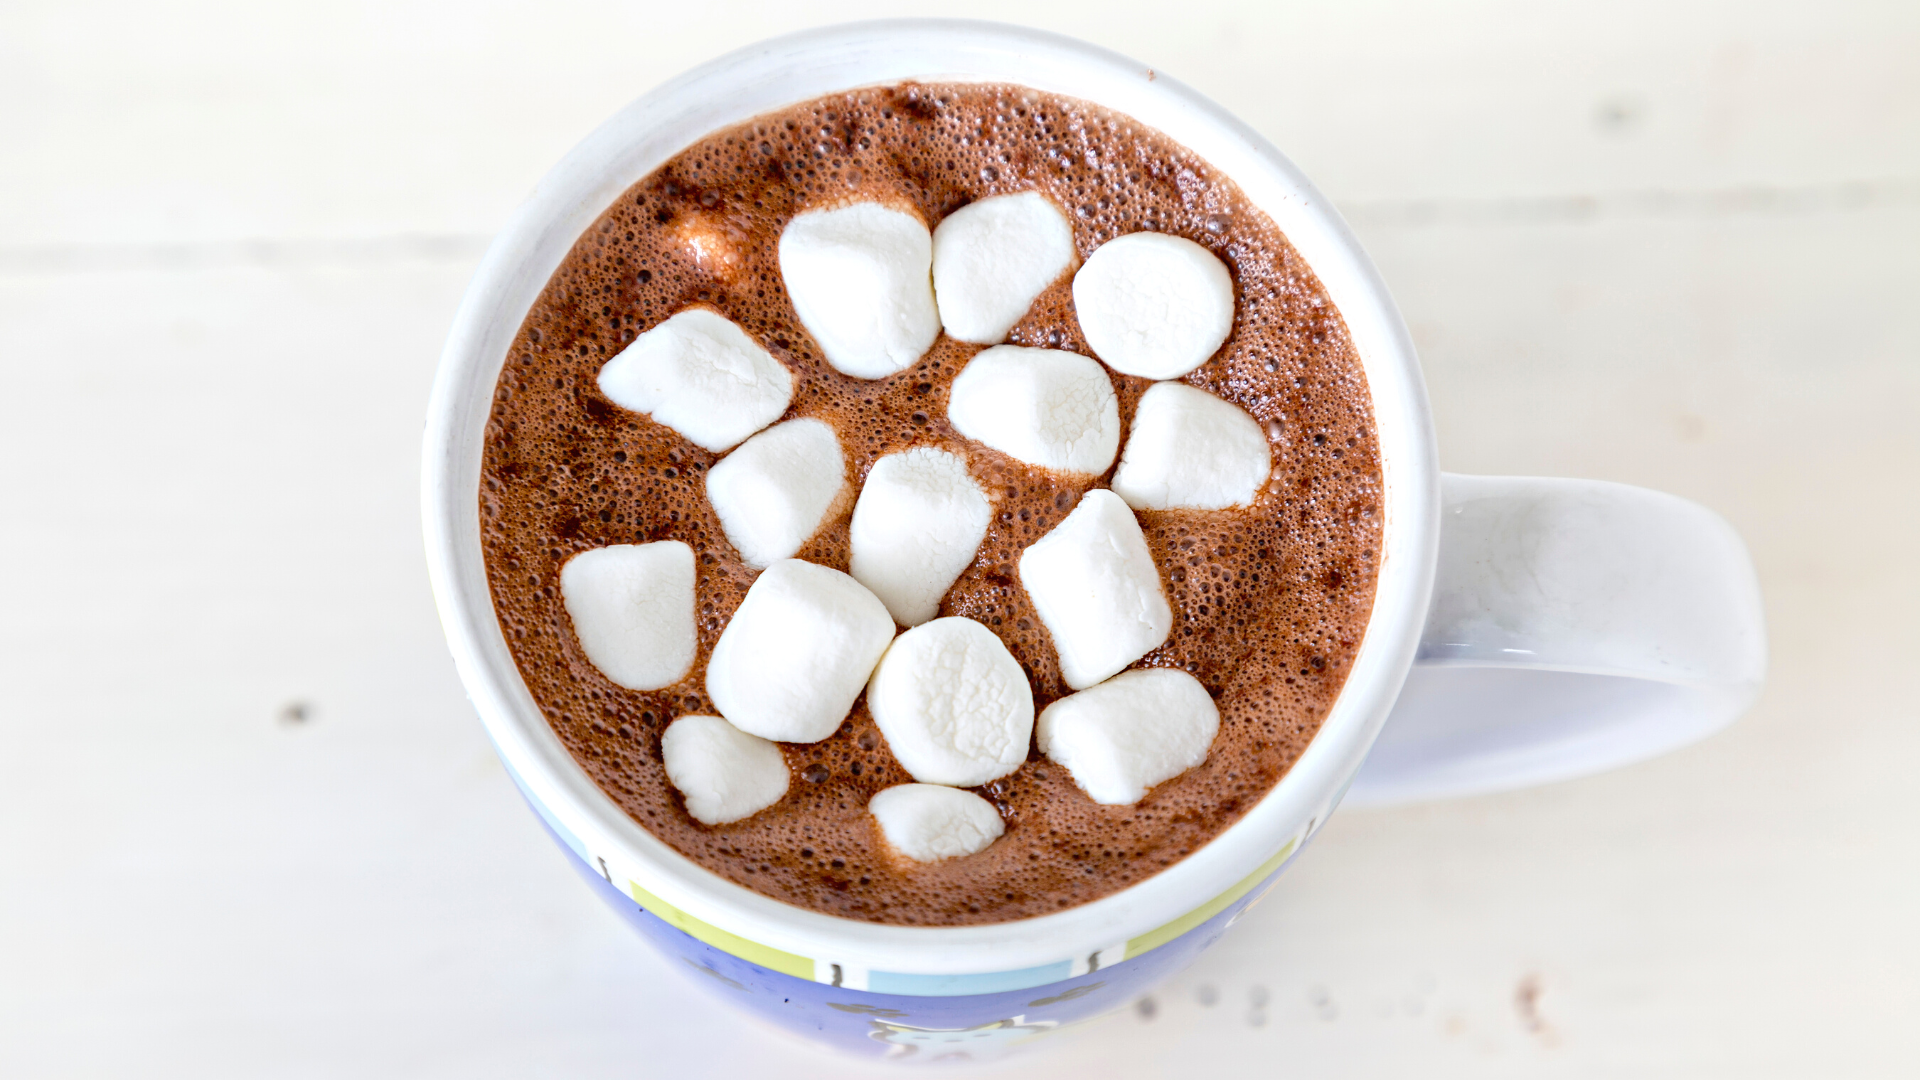 11 Best Hot Chocolate Makers That Every Chocoholic Must Own